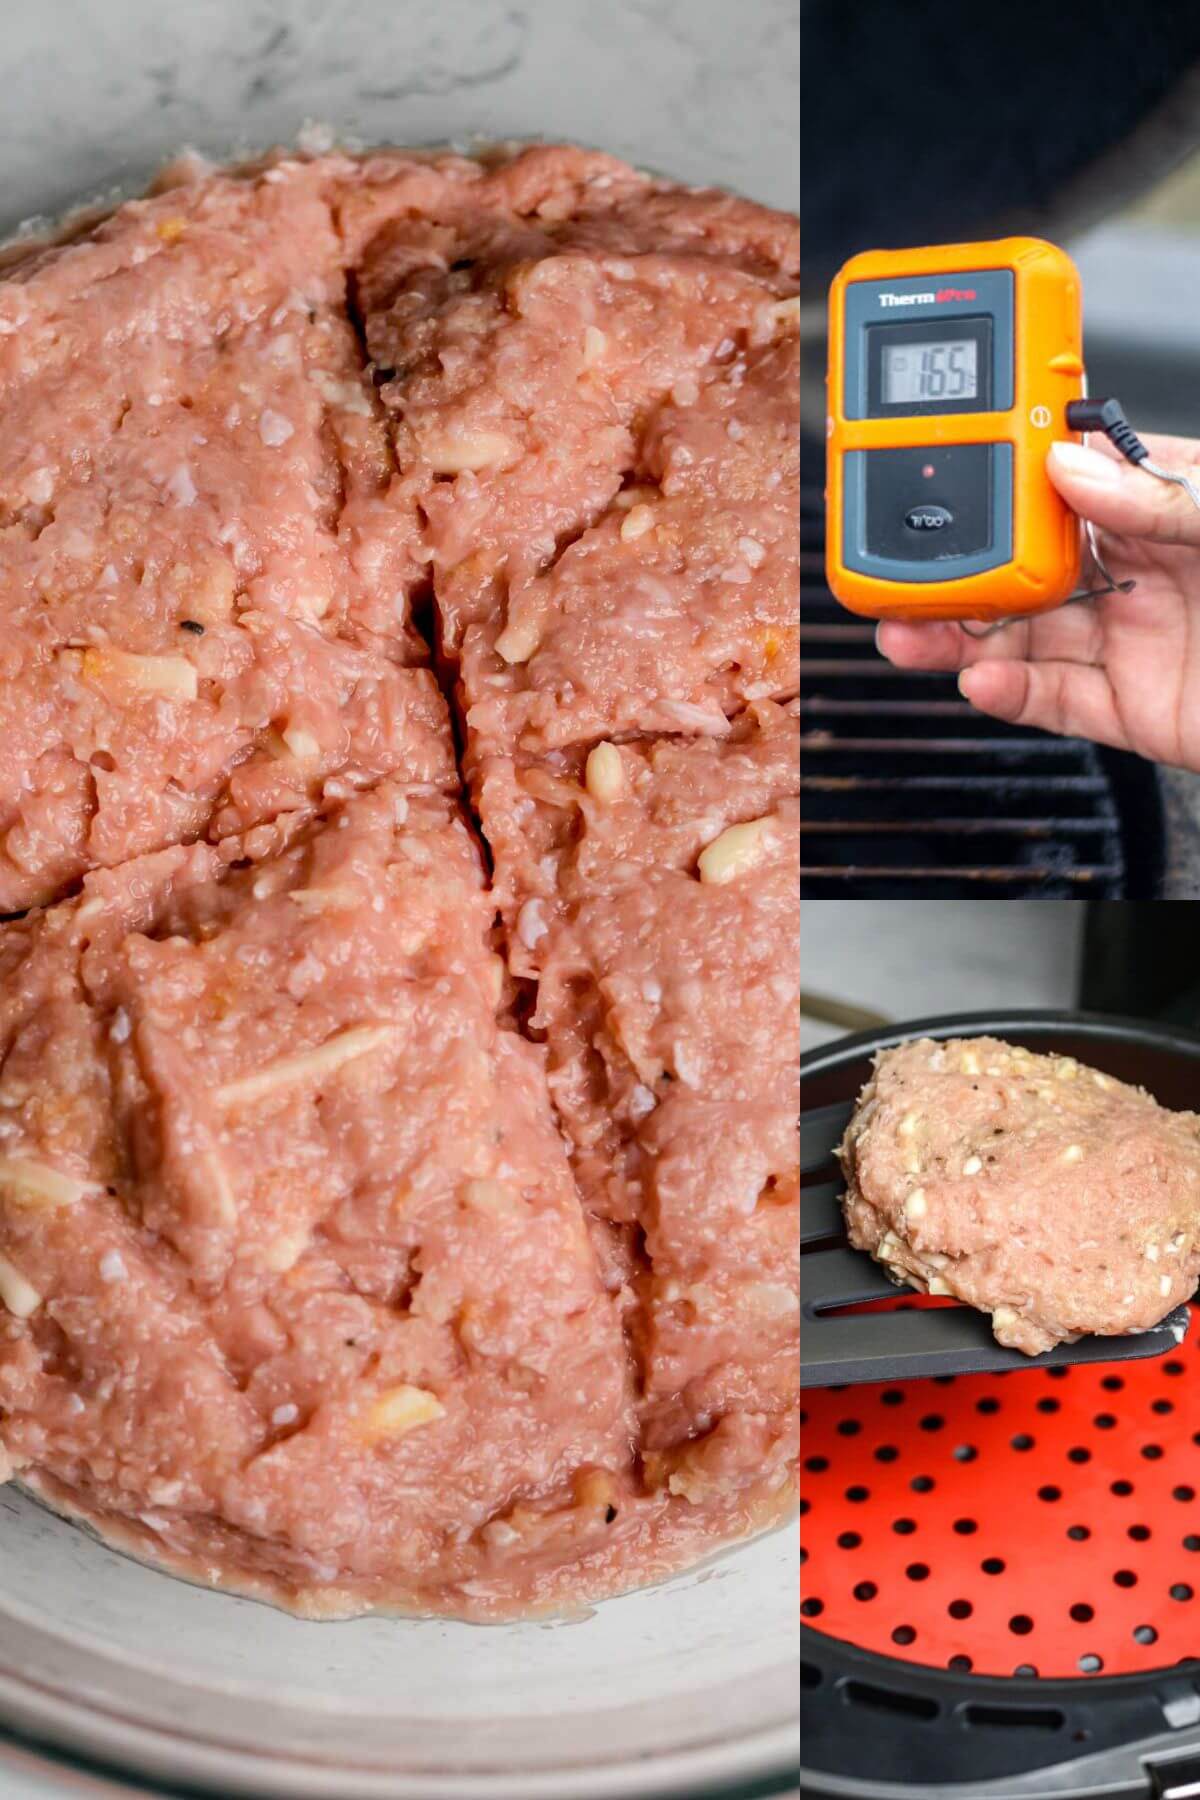 Cooking Safety: Cook Ground Turkey to What Temp?